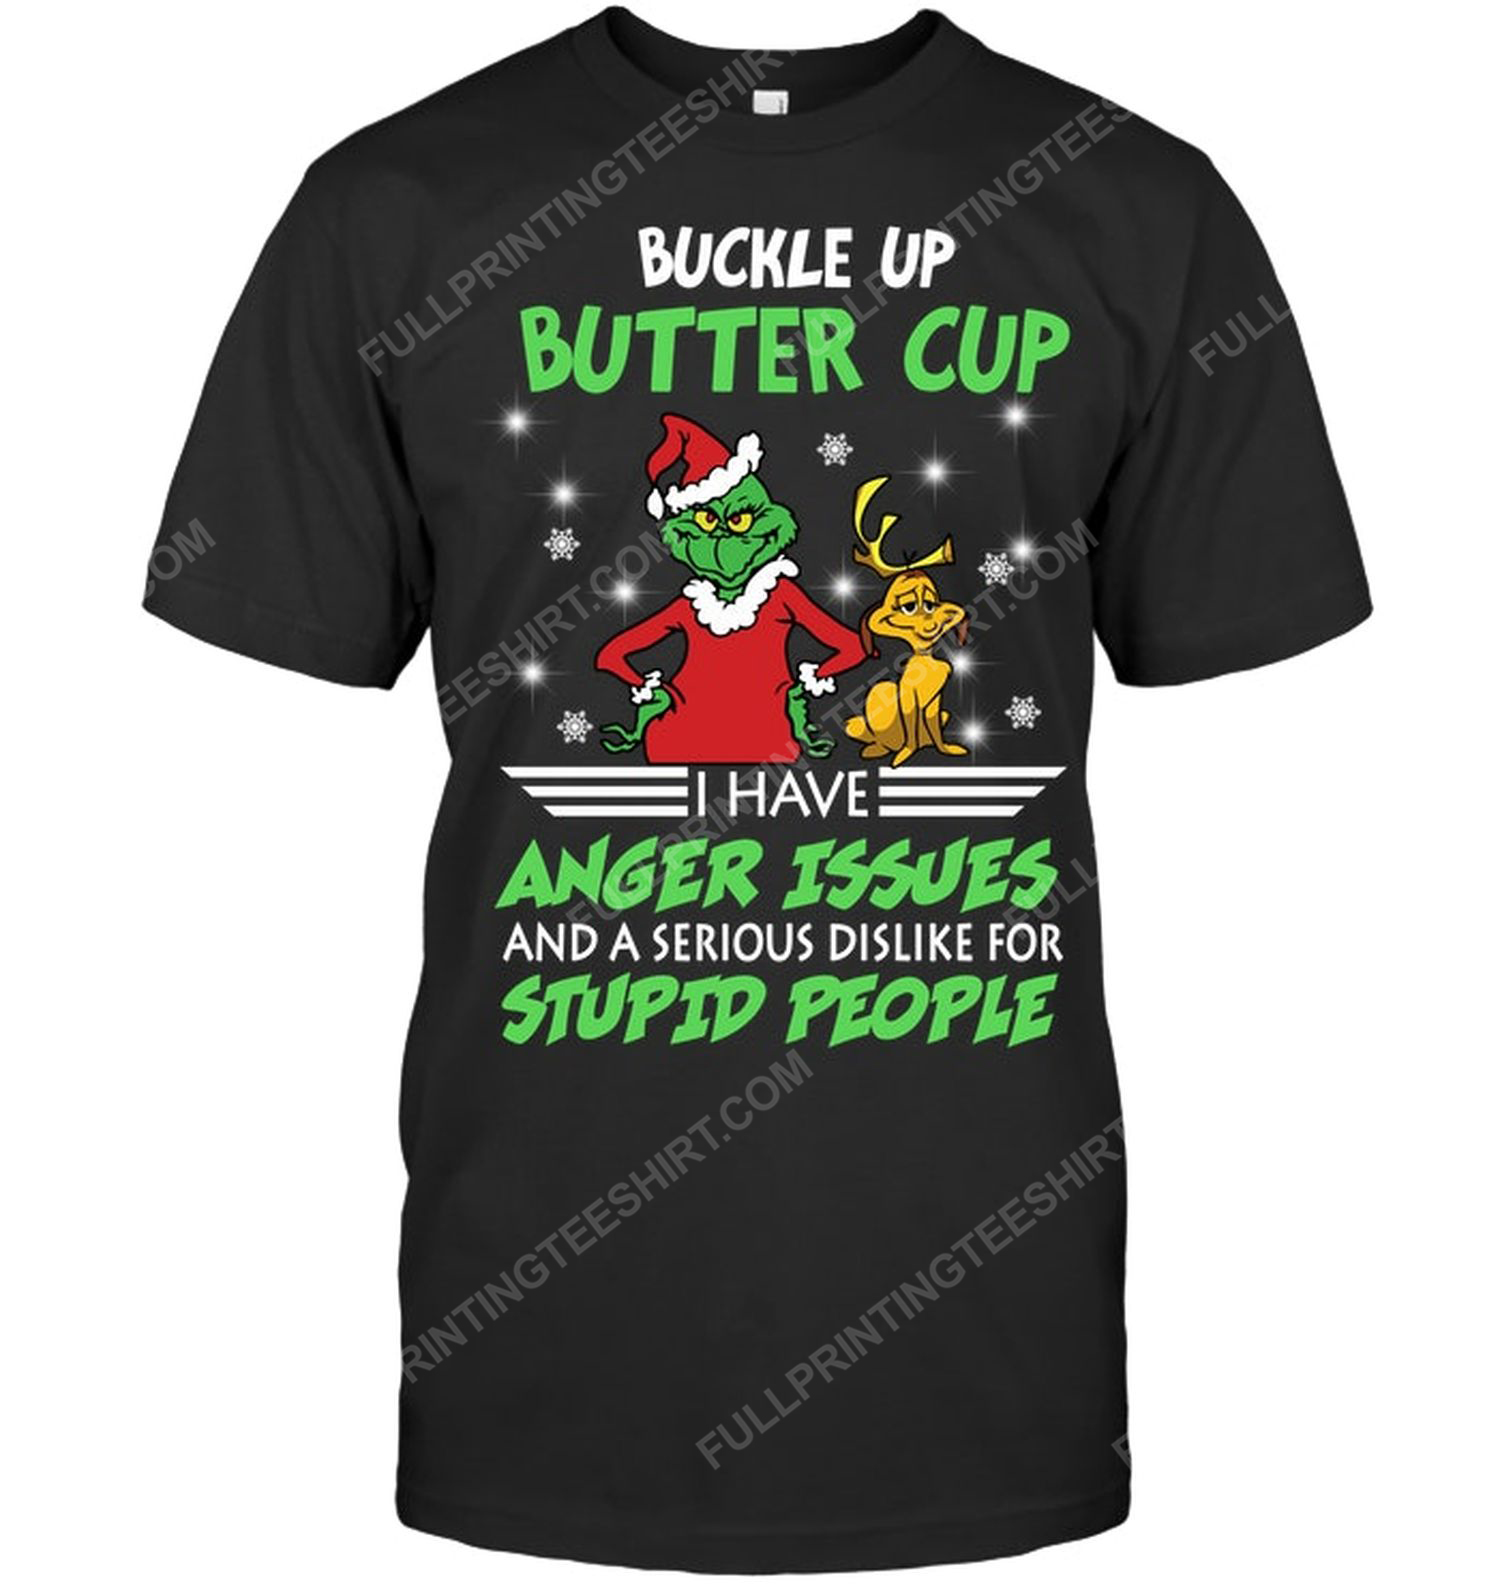 The grinch buckle the grinch up buttercup i have anger issues and a serious dislike for stupid people tshirt